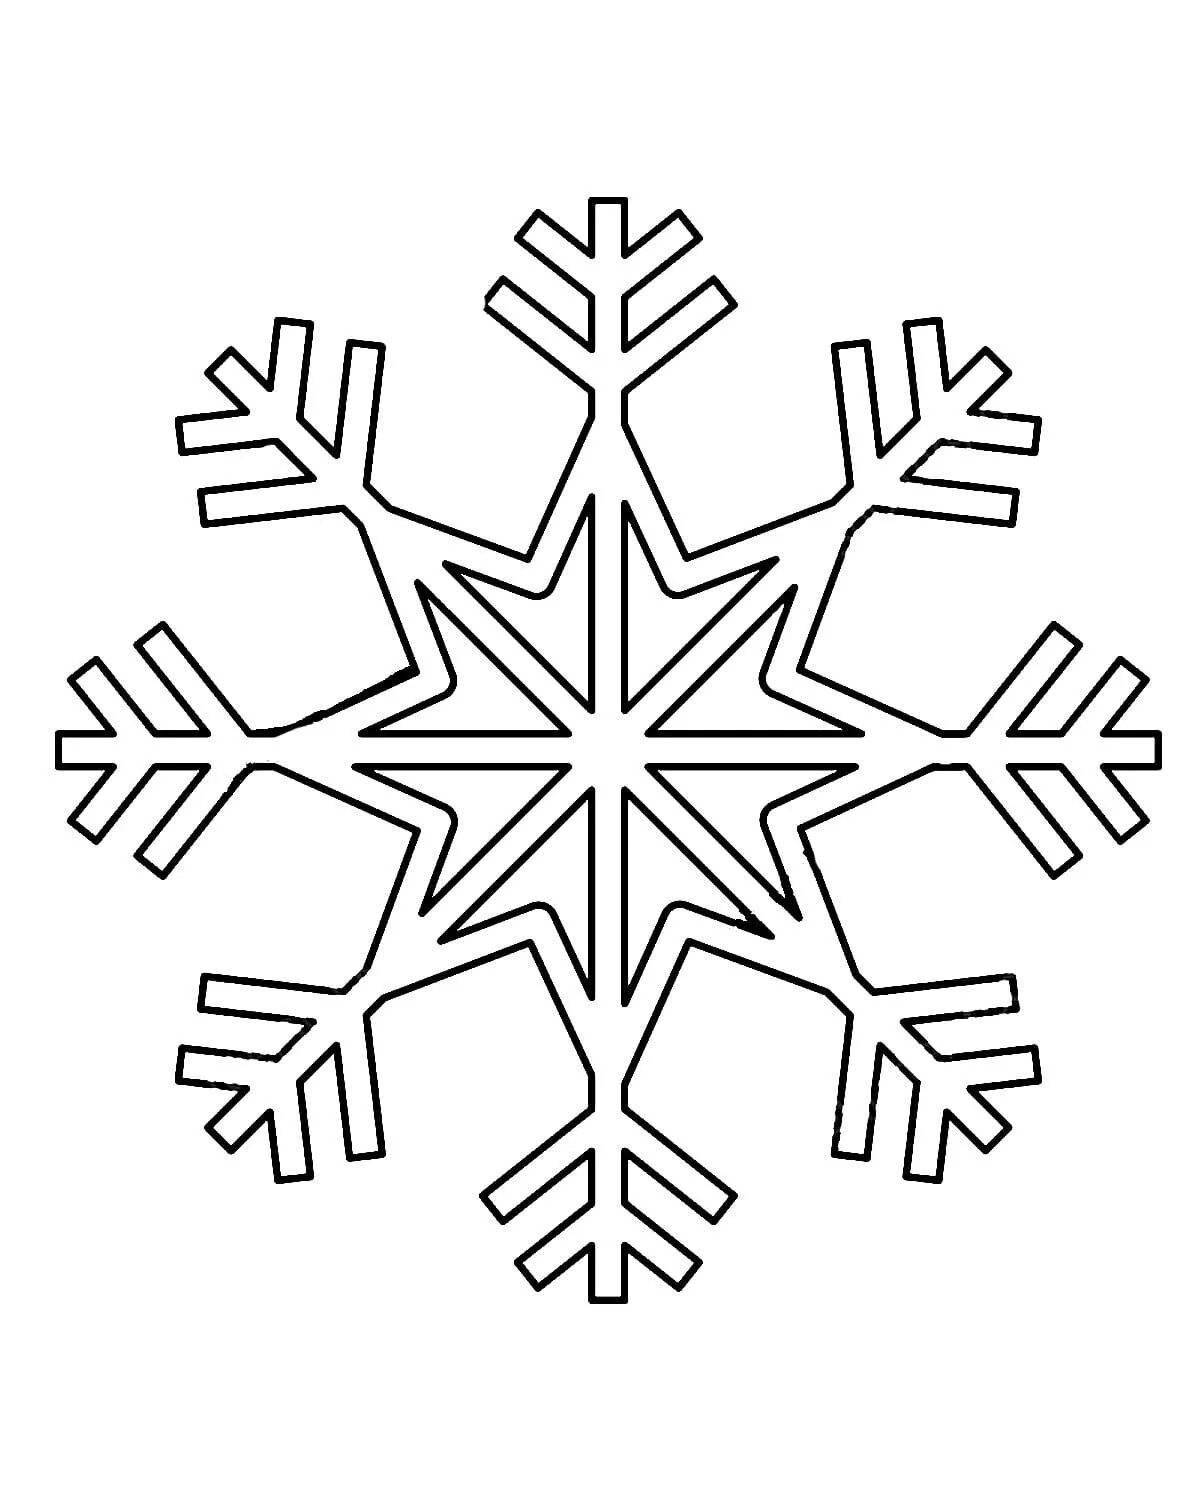 Snowflake for children 3 4 years old #8